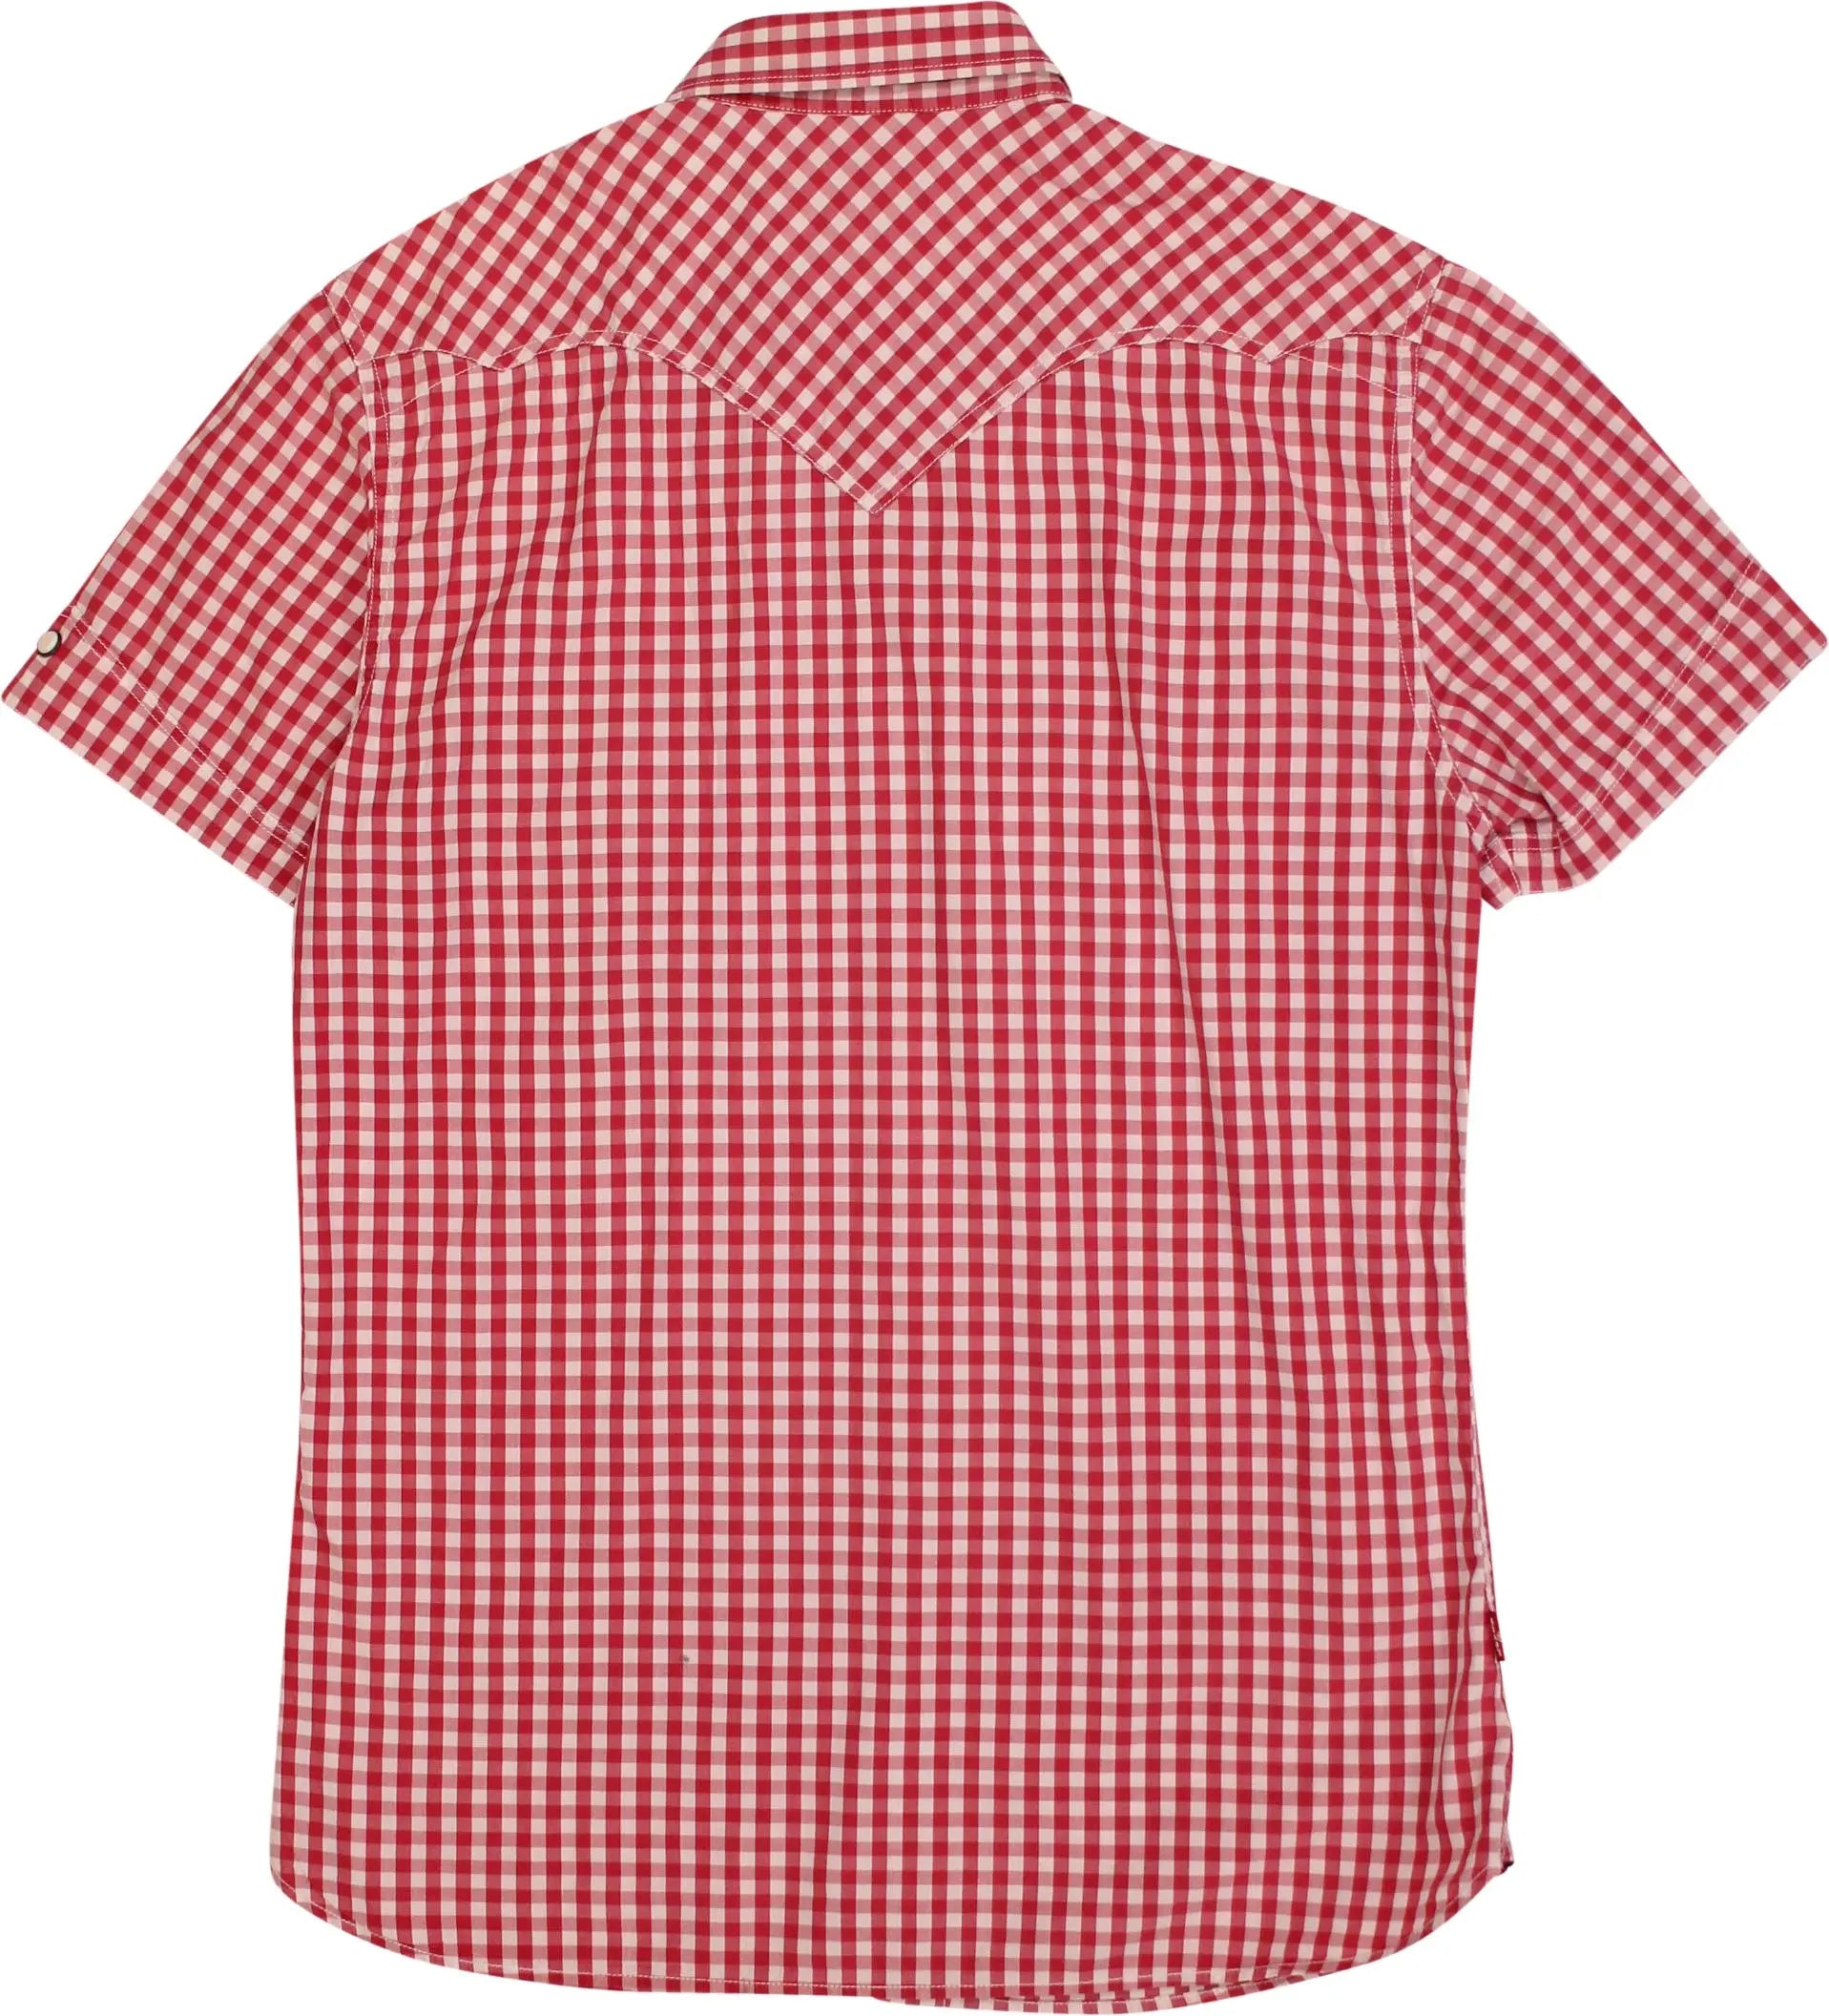 Levi's - Red Checked Short Sleeve Shirt by Levi's- ThriftTale.com - Vintage and second handclothing